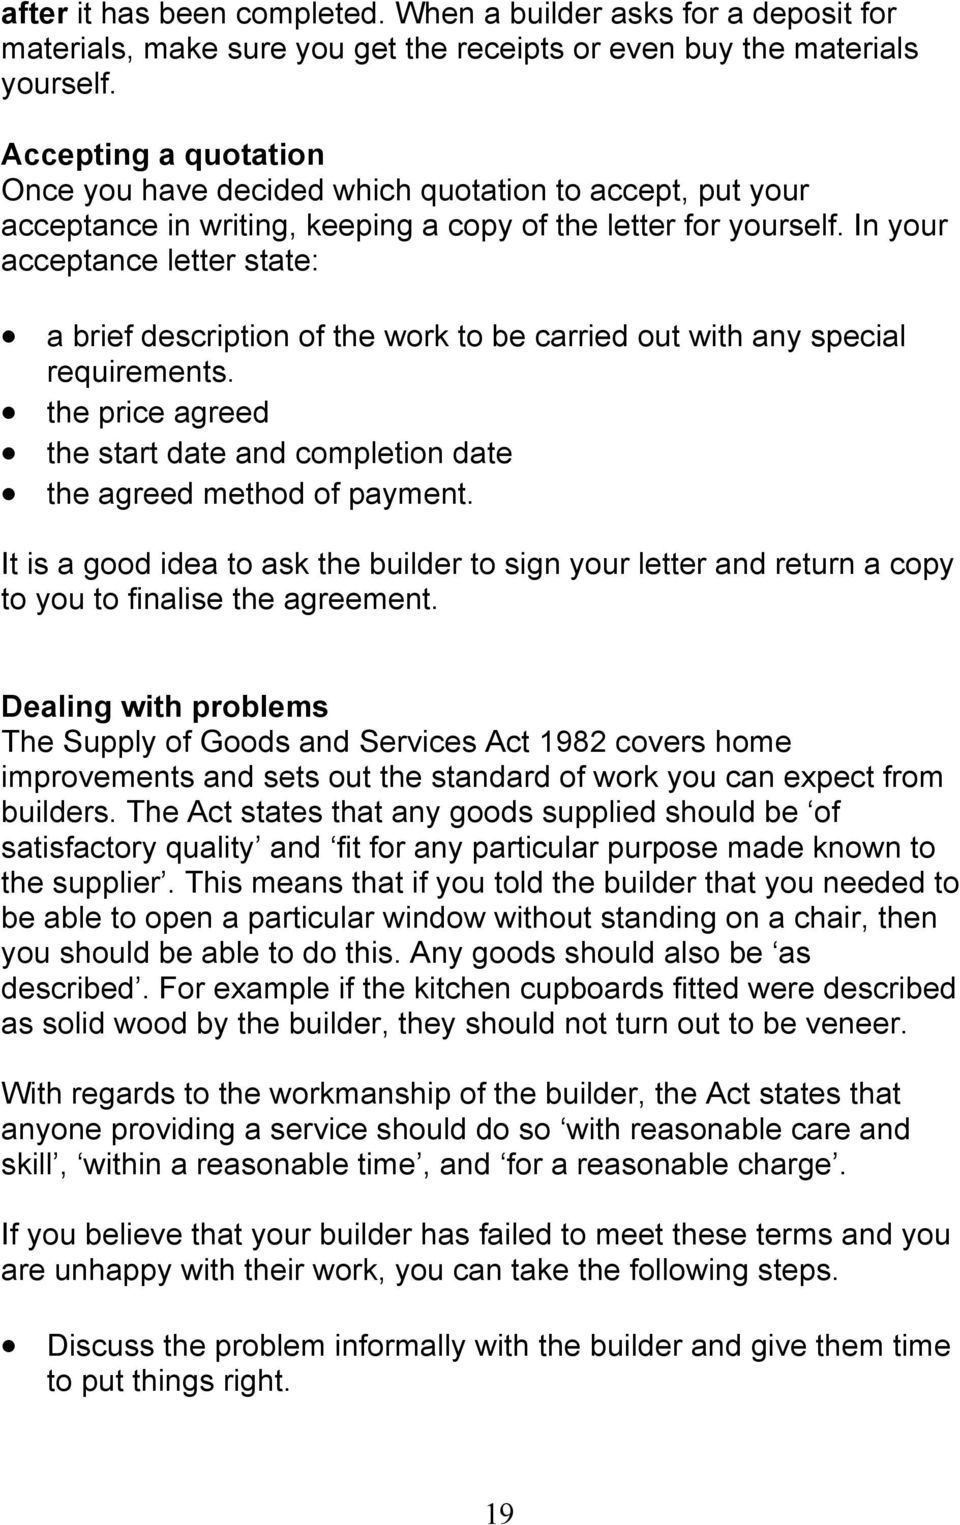 In your acceptance letter state: a brief description of the work to be carried out with any special requirements. the price agreed the start date and completion date the agreed method of payment.